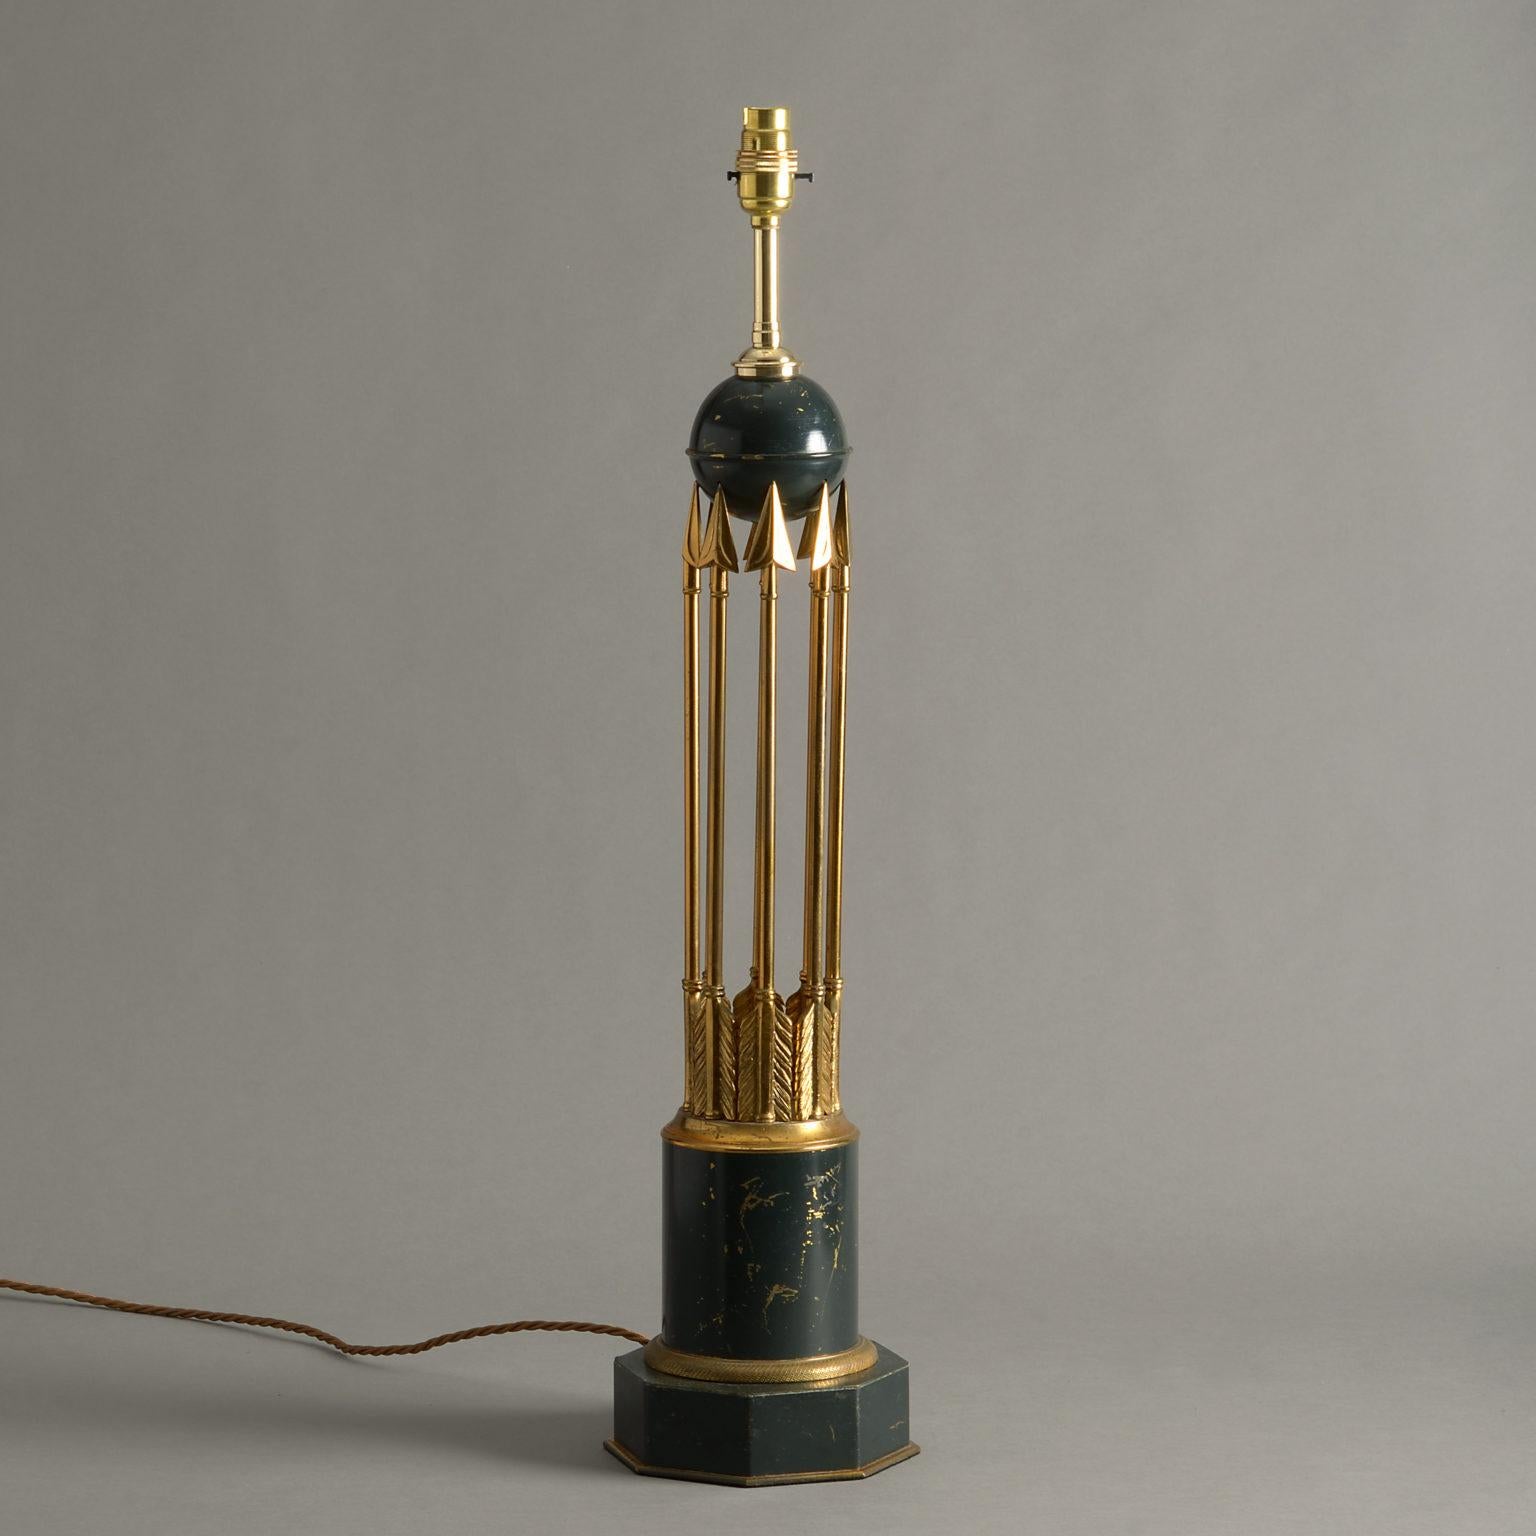 A mid-20th century tole and gilt brass table lamp, the body consisting of a dark green painted sphere, supported by a cluster of arrows, set upon a circular base, having an engine turned brass ring mount upon an octagonal socle.

Dimensions refer